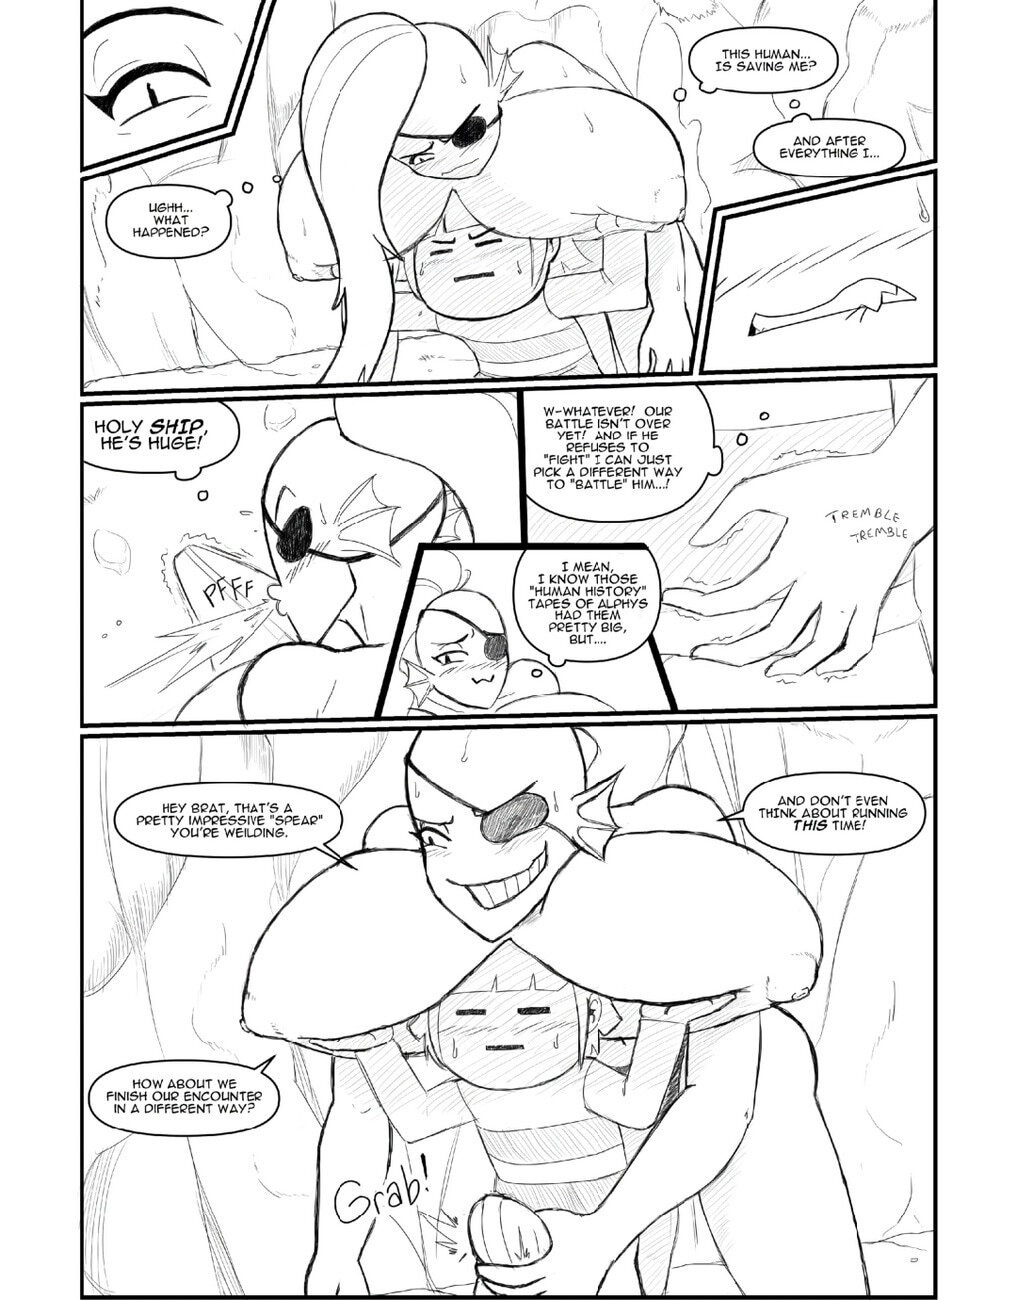 Getting Frisky - Page 6